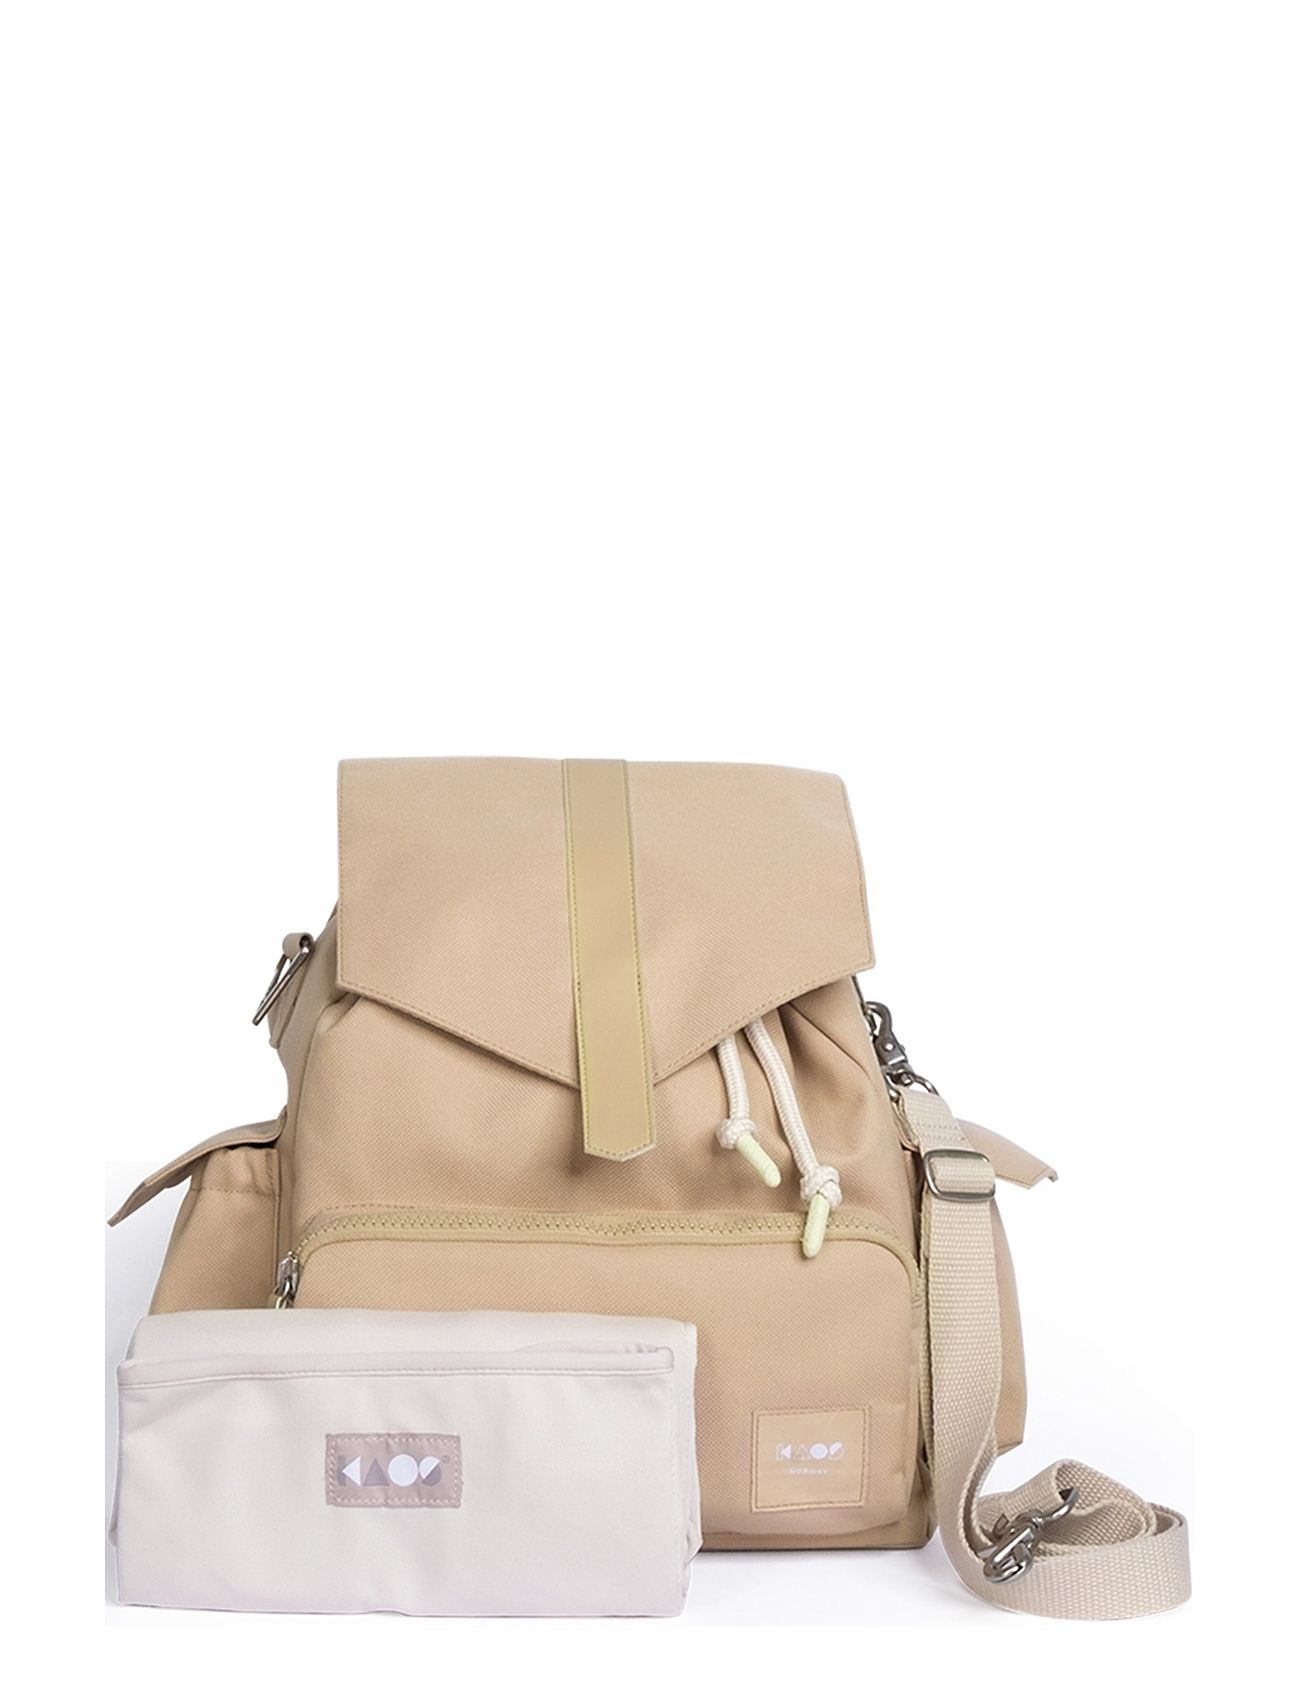 Ransel Changing Bag Baby & Maternity Care & Hygiene Changing Bags Beige KAOS